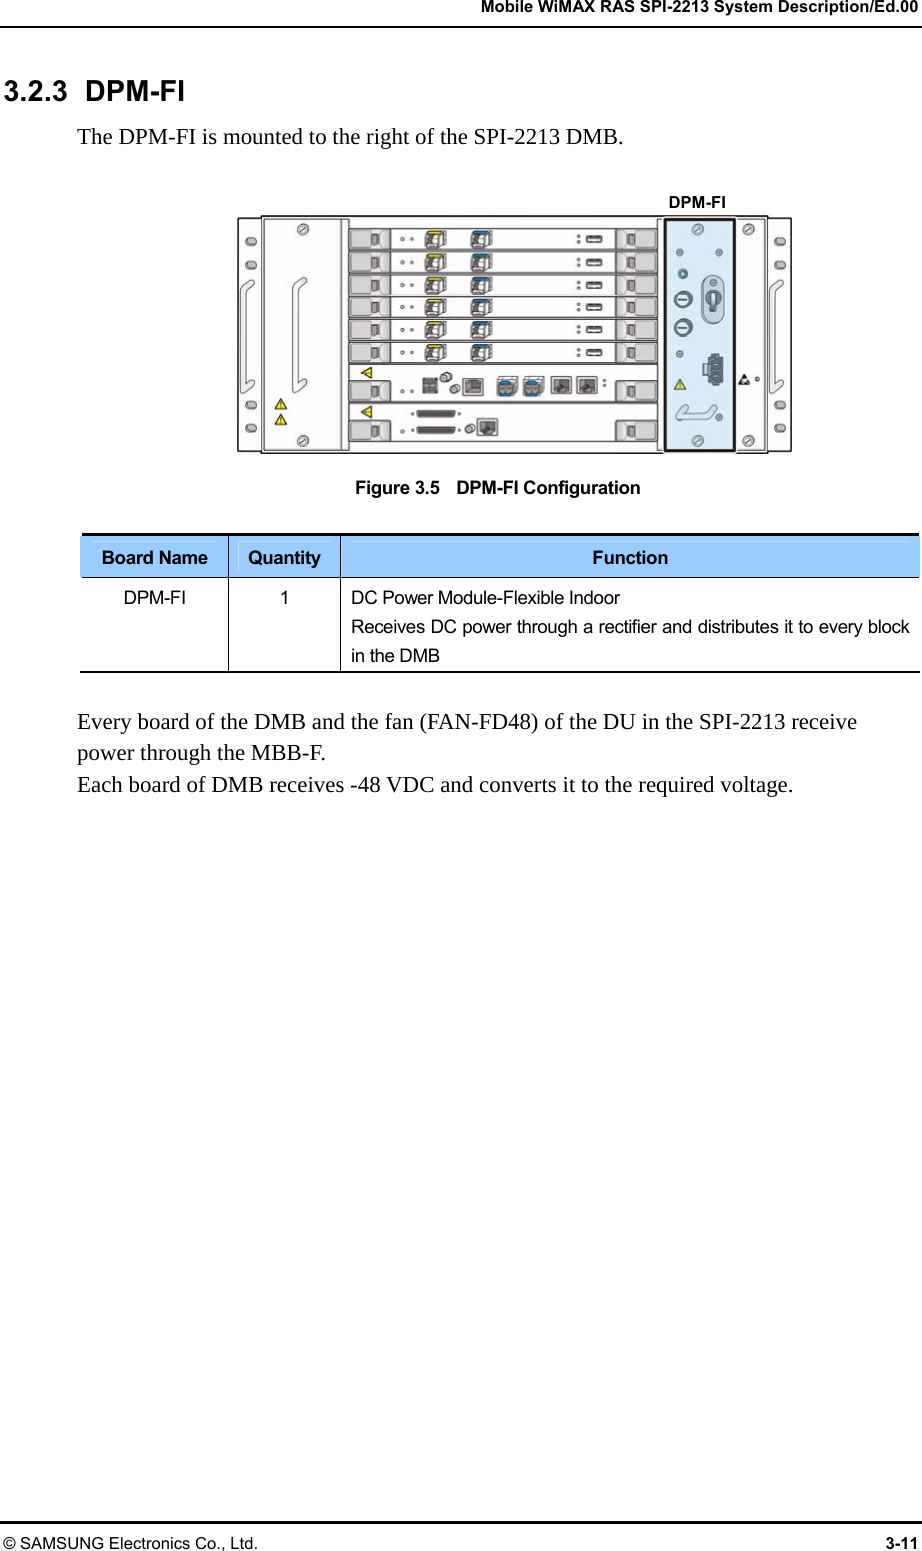   Mobile WiMAX RAS SPI-2213 System Description/Ed.00 © SAMSUNG Electronics Co., Ltd.  3-11 3.2.3 DPM-FI The DPM-FI is mounted to the right of the SPI-2213 DMB.  Figure 3.5    DPM-FI Configuration  Board Name  Quantity  Function DPM-FI  1  DC Power Module-Flexible Indoor Receives DC power through a rectifier and distributes it to every block in the DMB  Every board of the DMB and the fan (FAN-FD48) of the DU in the SPI-2213 receive power through the MBB-F. Each board of DMB receives -48 VDC and converts it to the required voltage.  DPM-FI 